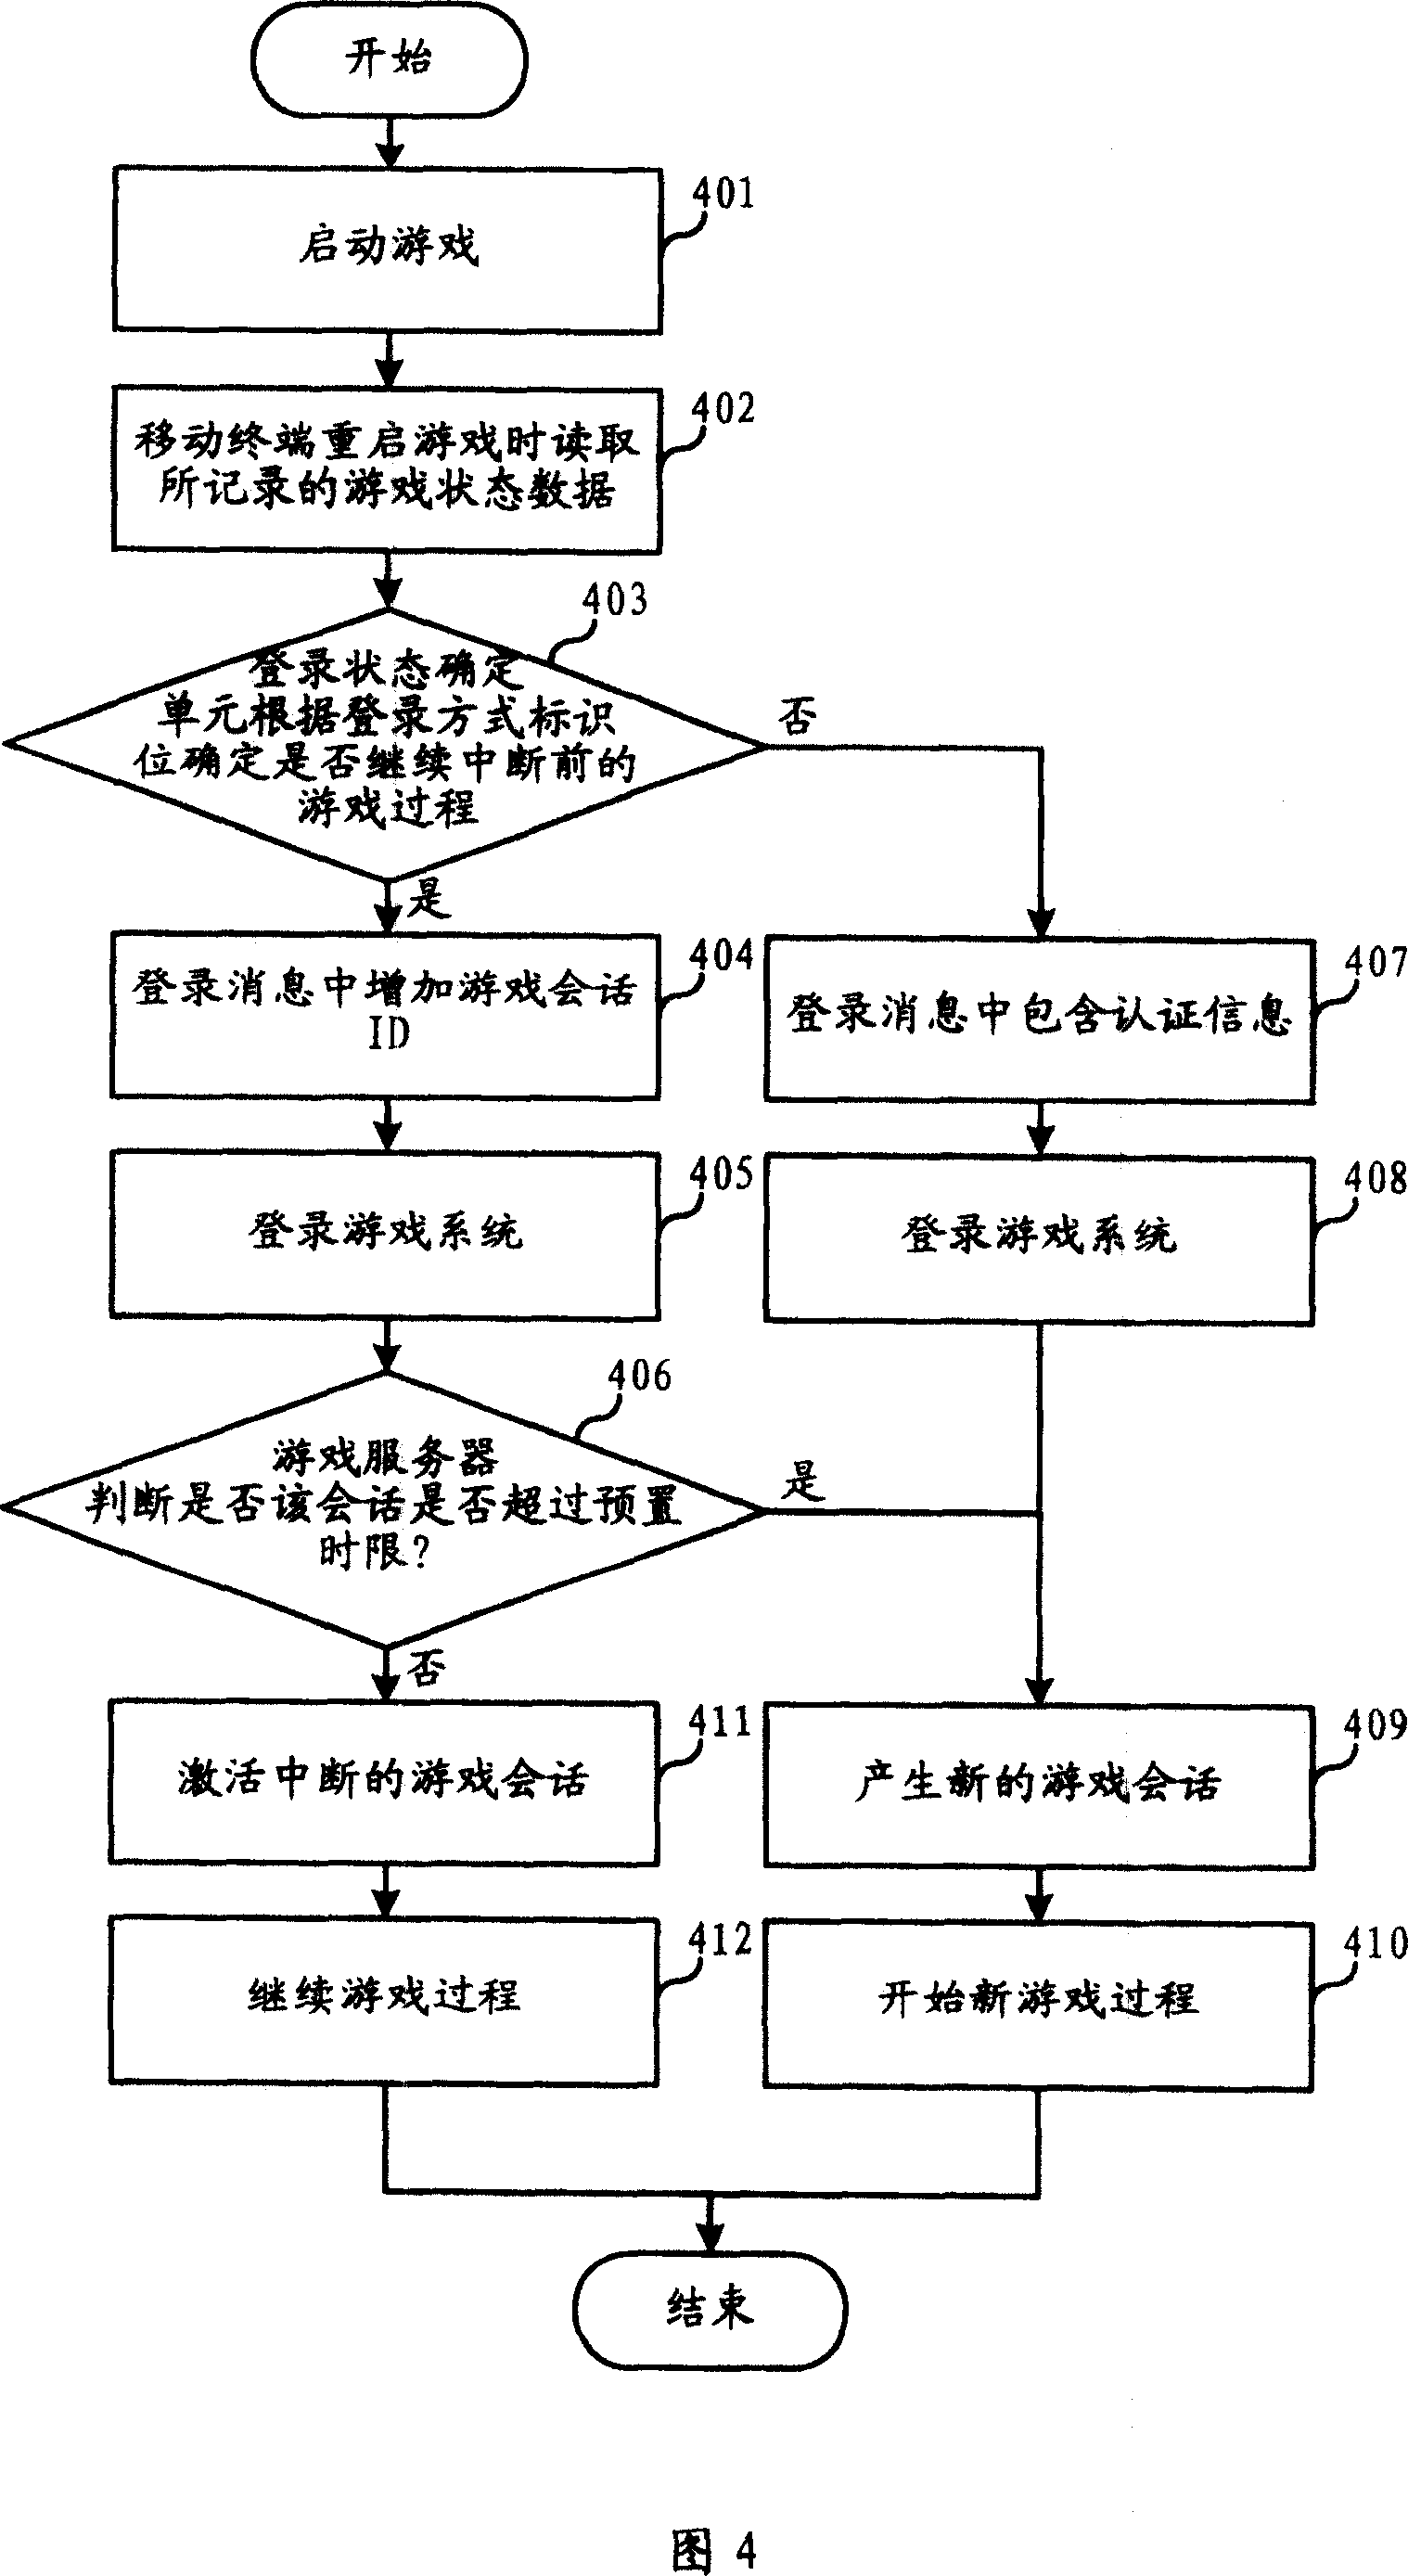 Method of automatically recovering of mobile terminal on internet game interrupting and system thereof